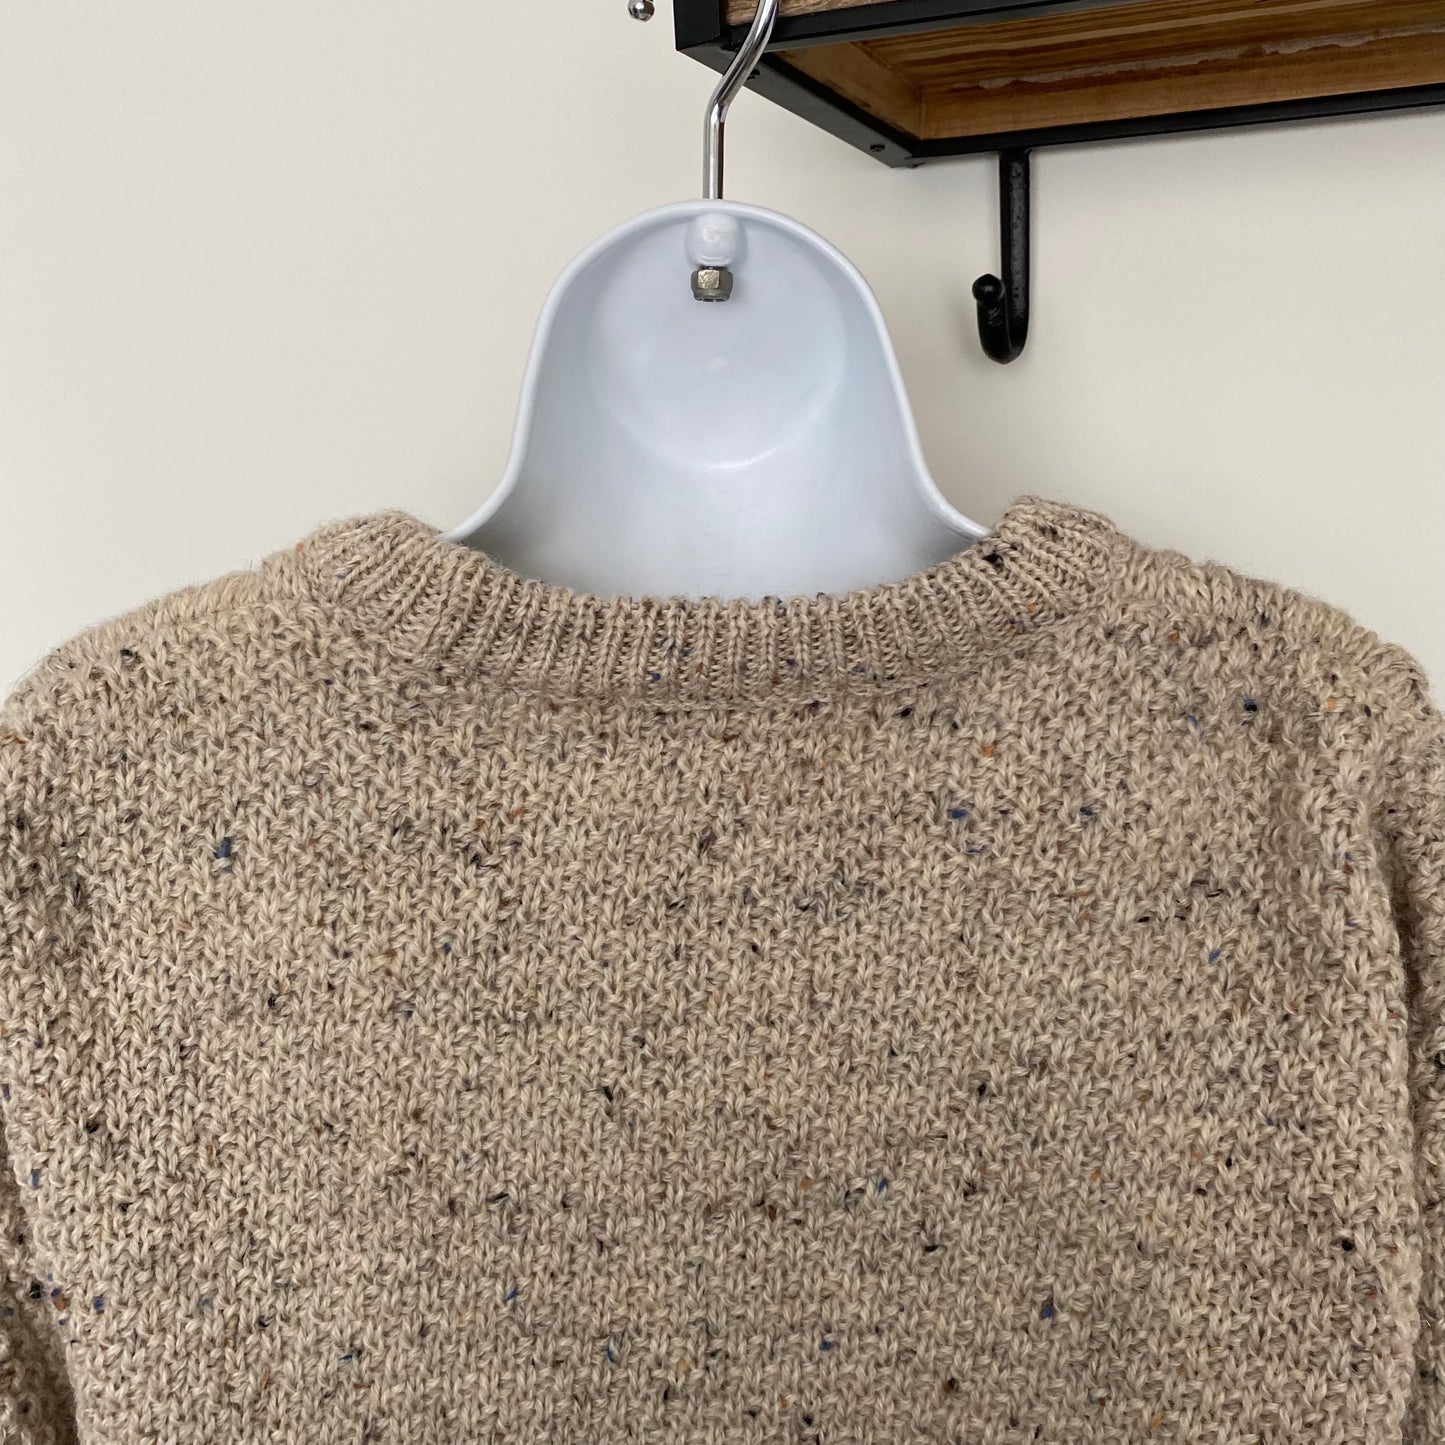 Gorgeous Cable Knit Wool Oversized Fisherman Sweater